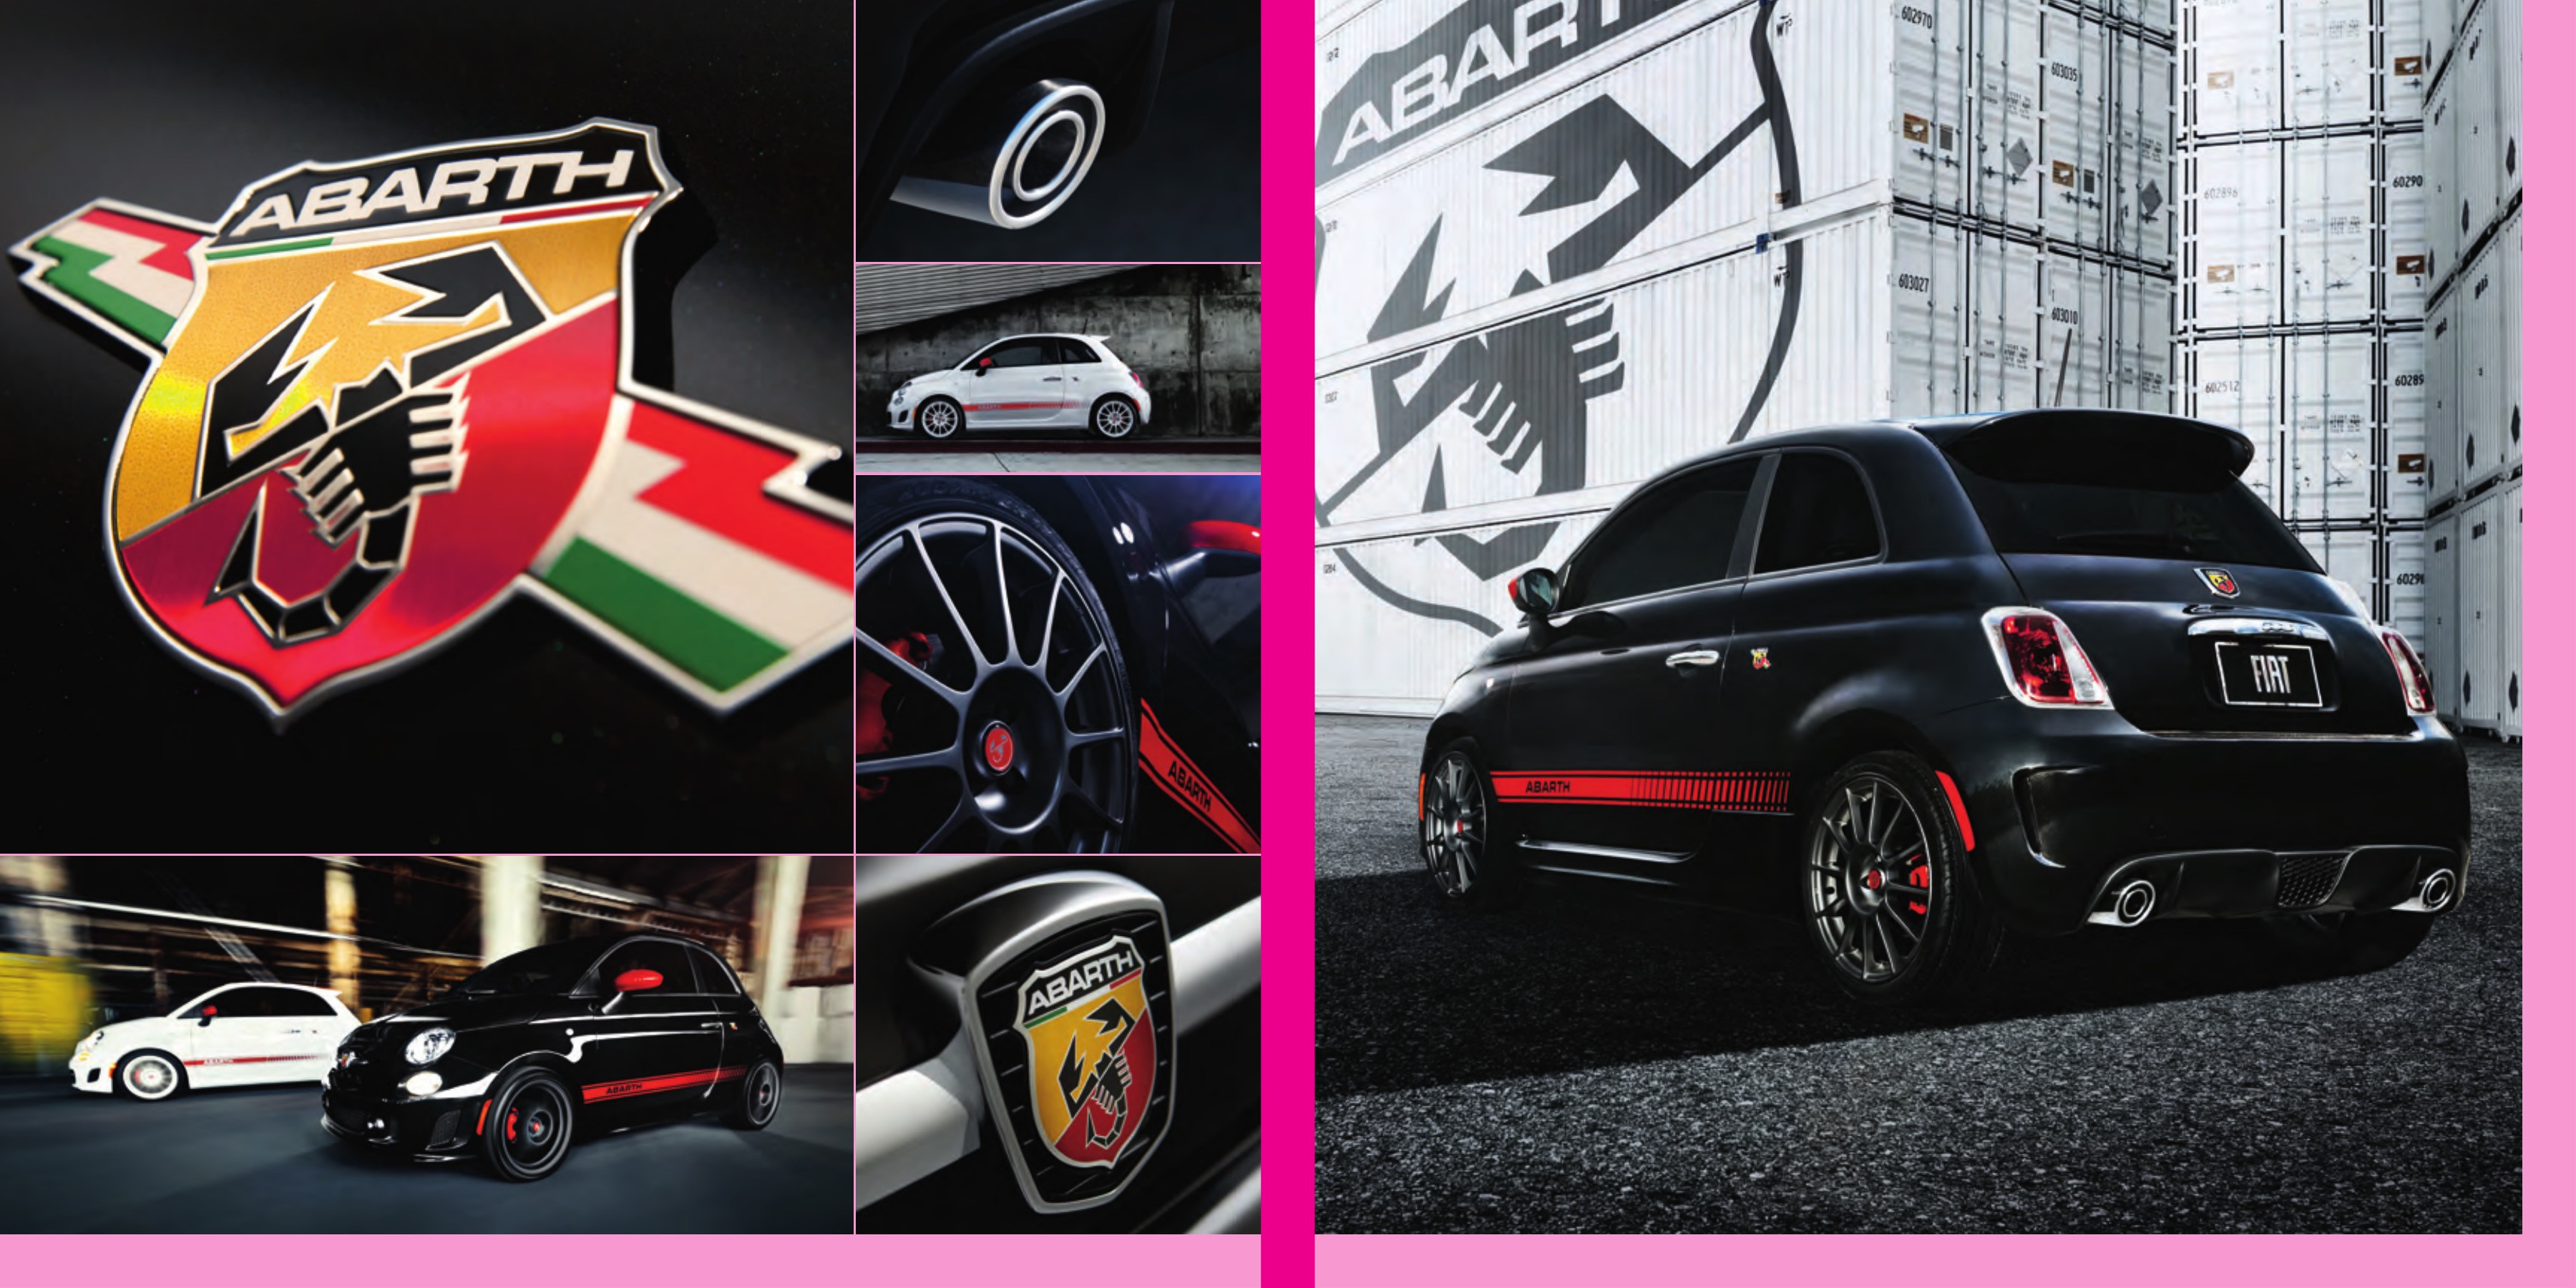 2013 Fiat 500 Abarth Brochure Page 15